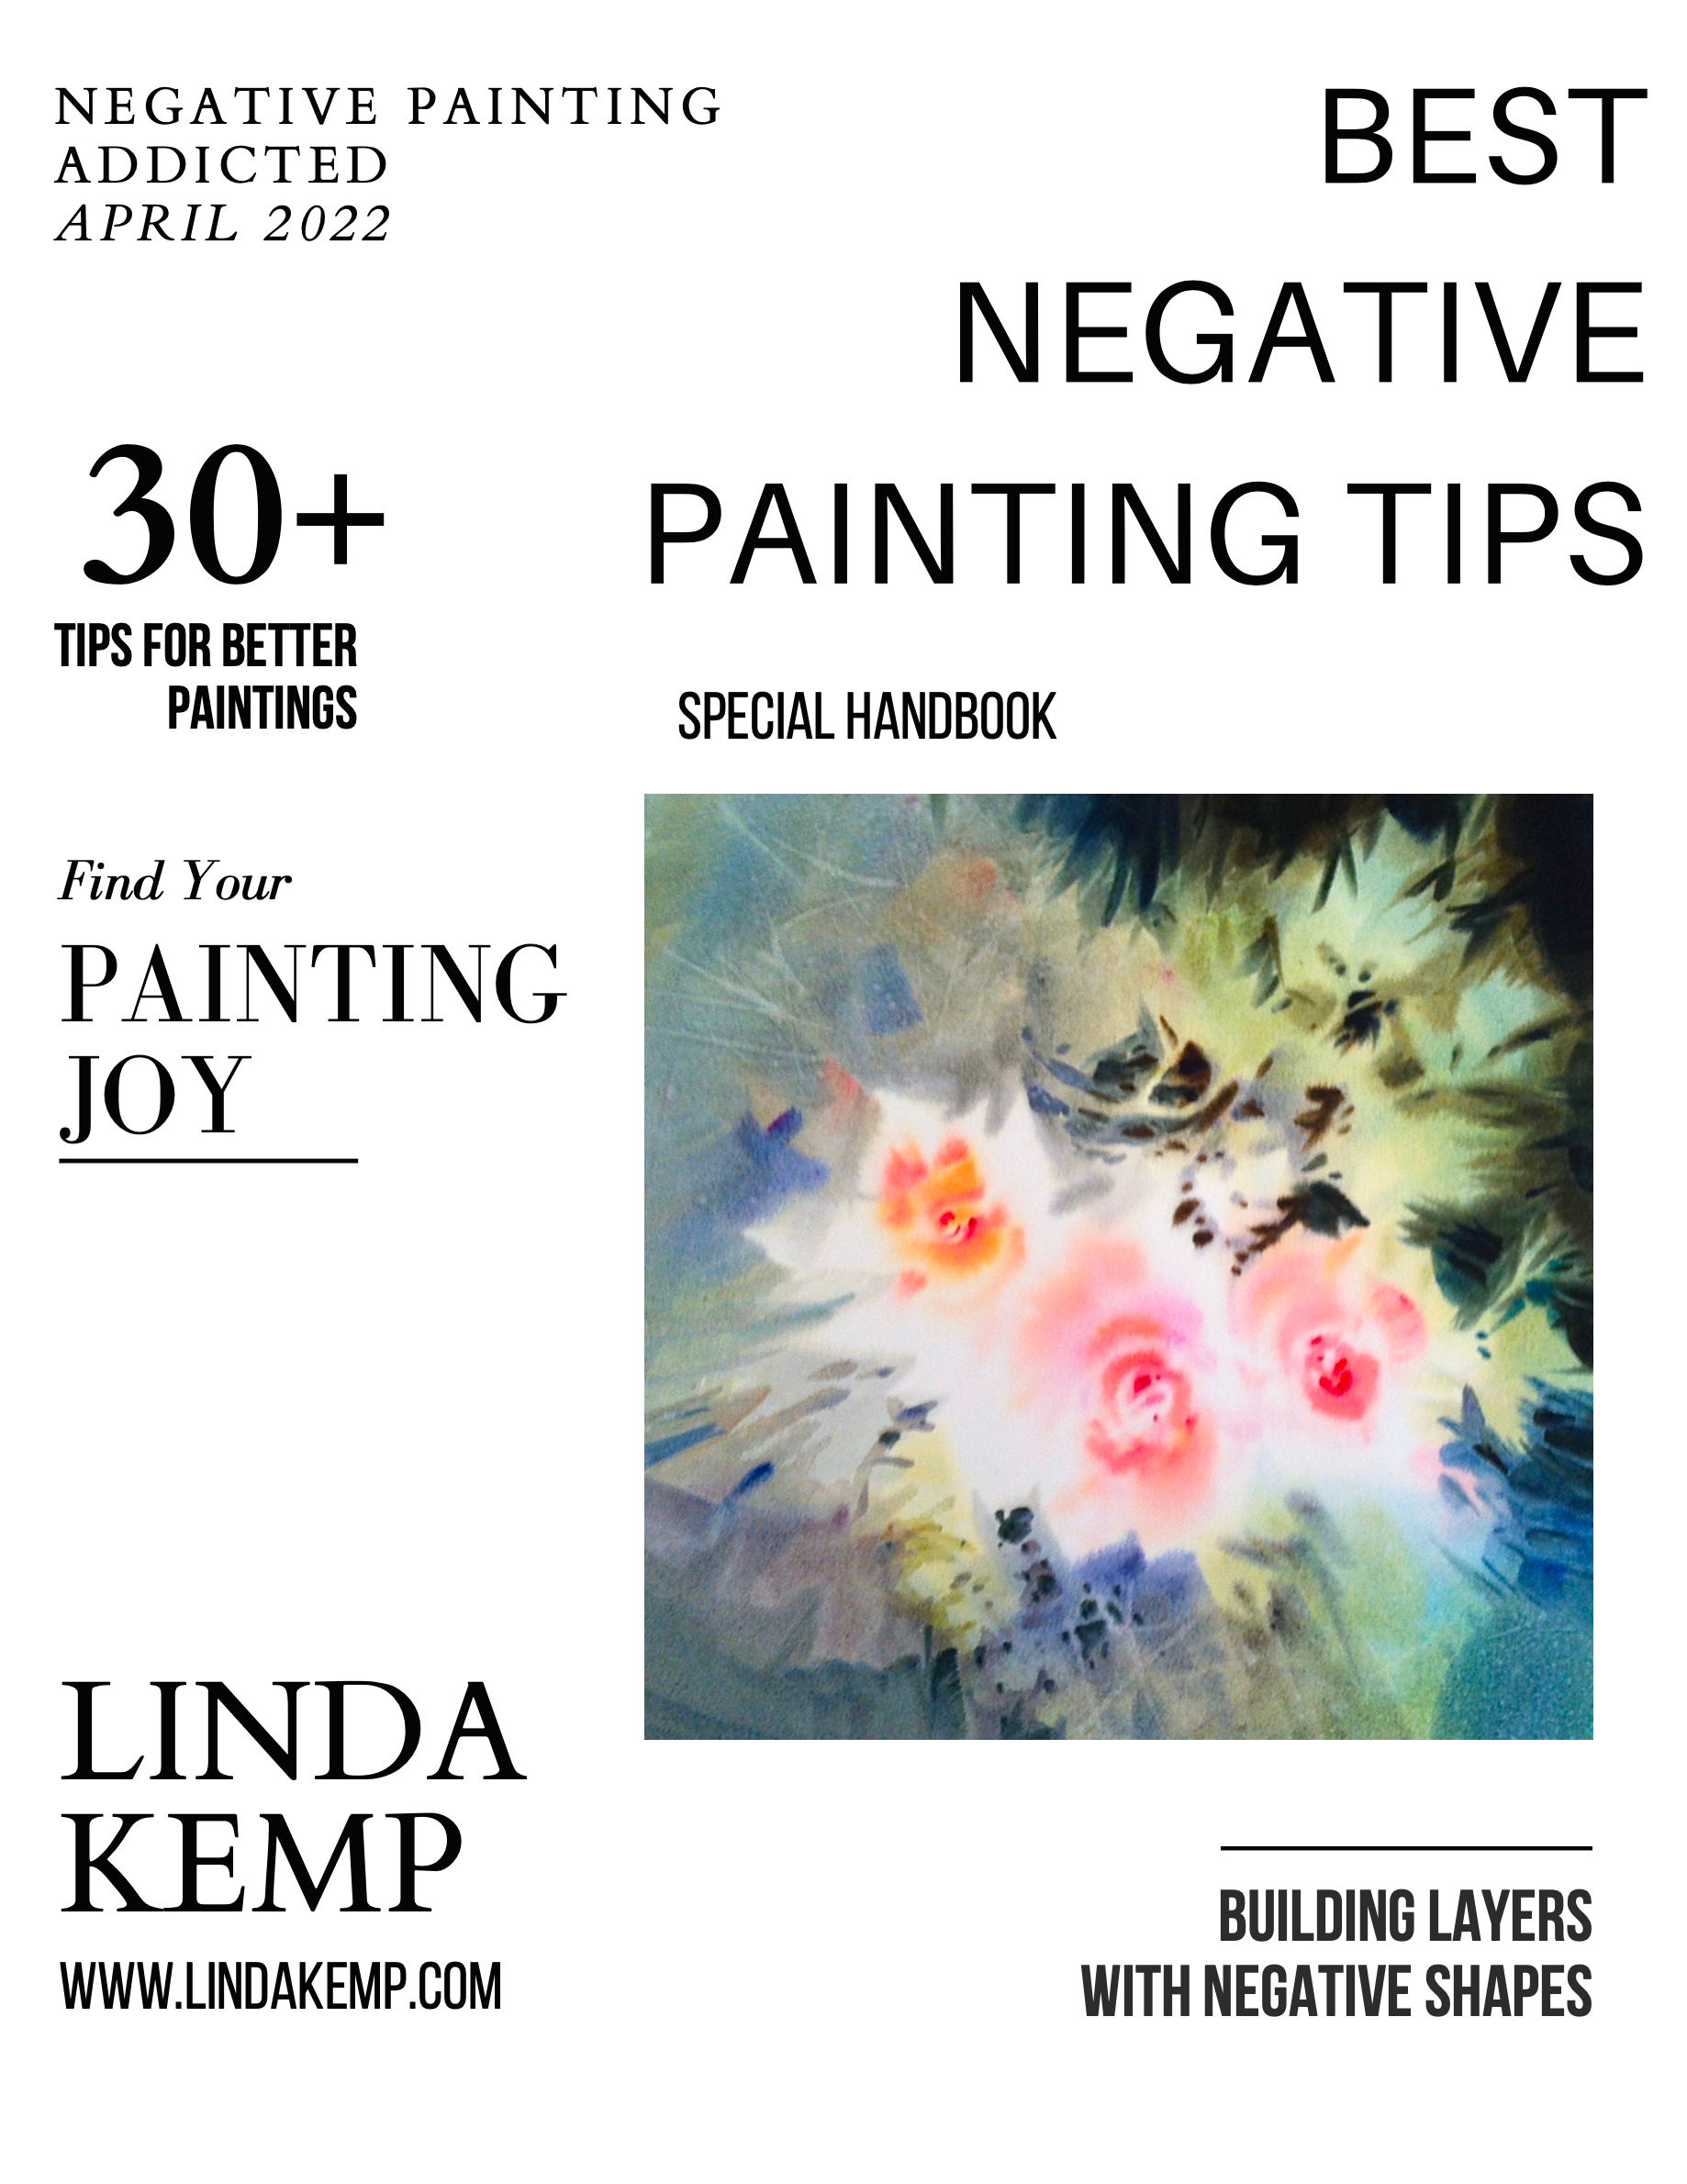 30+ Best Negative Painting Tips - For Printing - Free Handbook